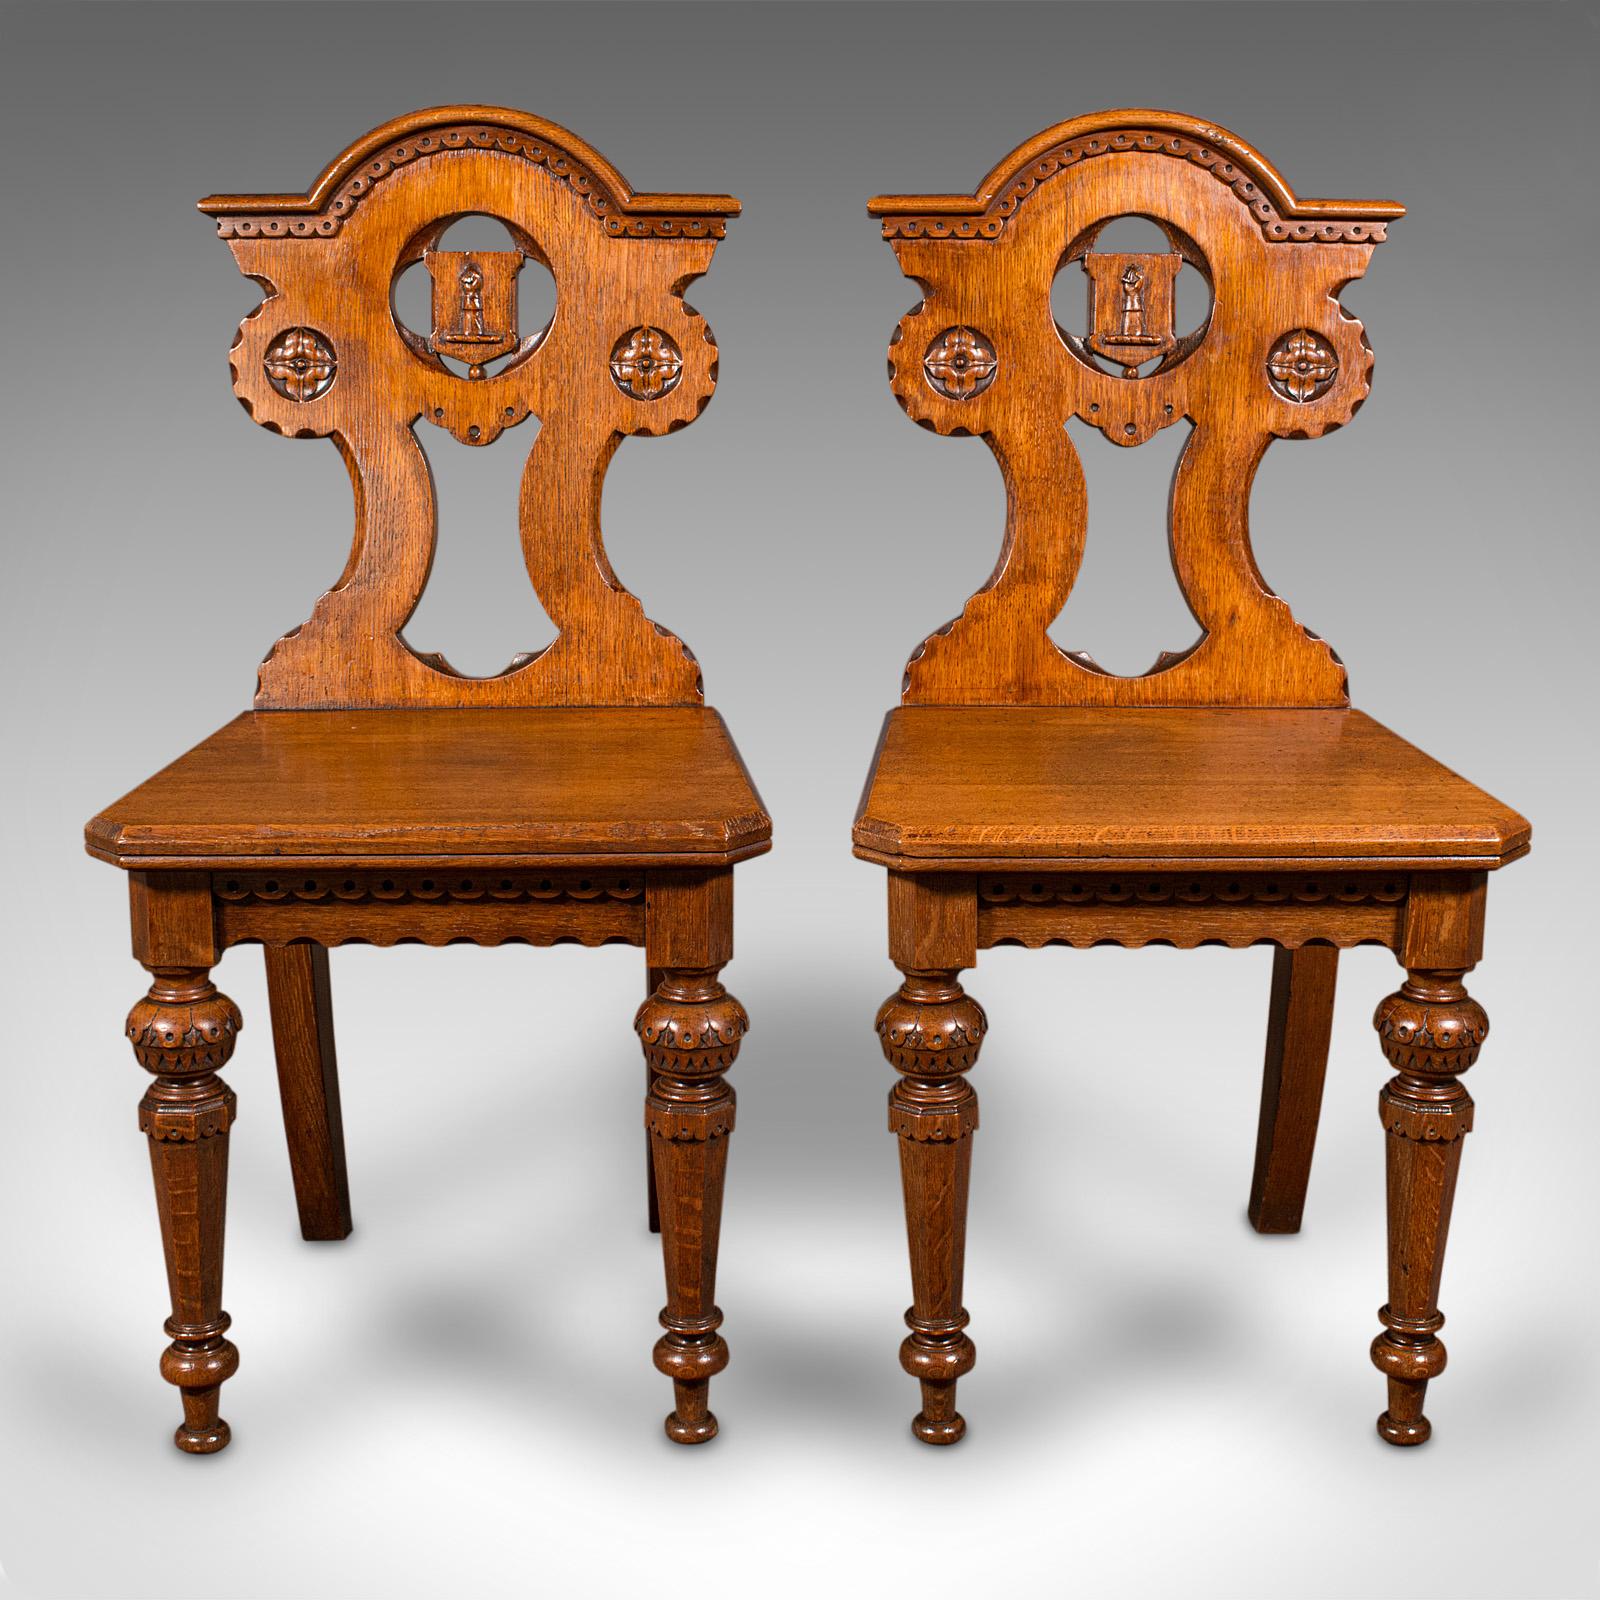 This is a pair of antique hall chairs. A Scottish, oak seat in Arts & Crafts taste, dating to the late Victorian period, circa 1890.

Striking and exceptional, a treat for the grandest of reception halls
Displaying a desirable aged patina and in